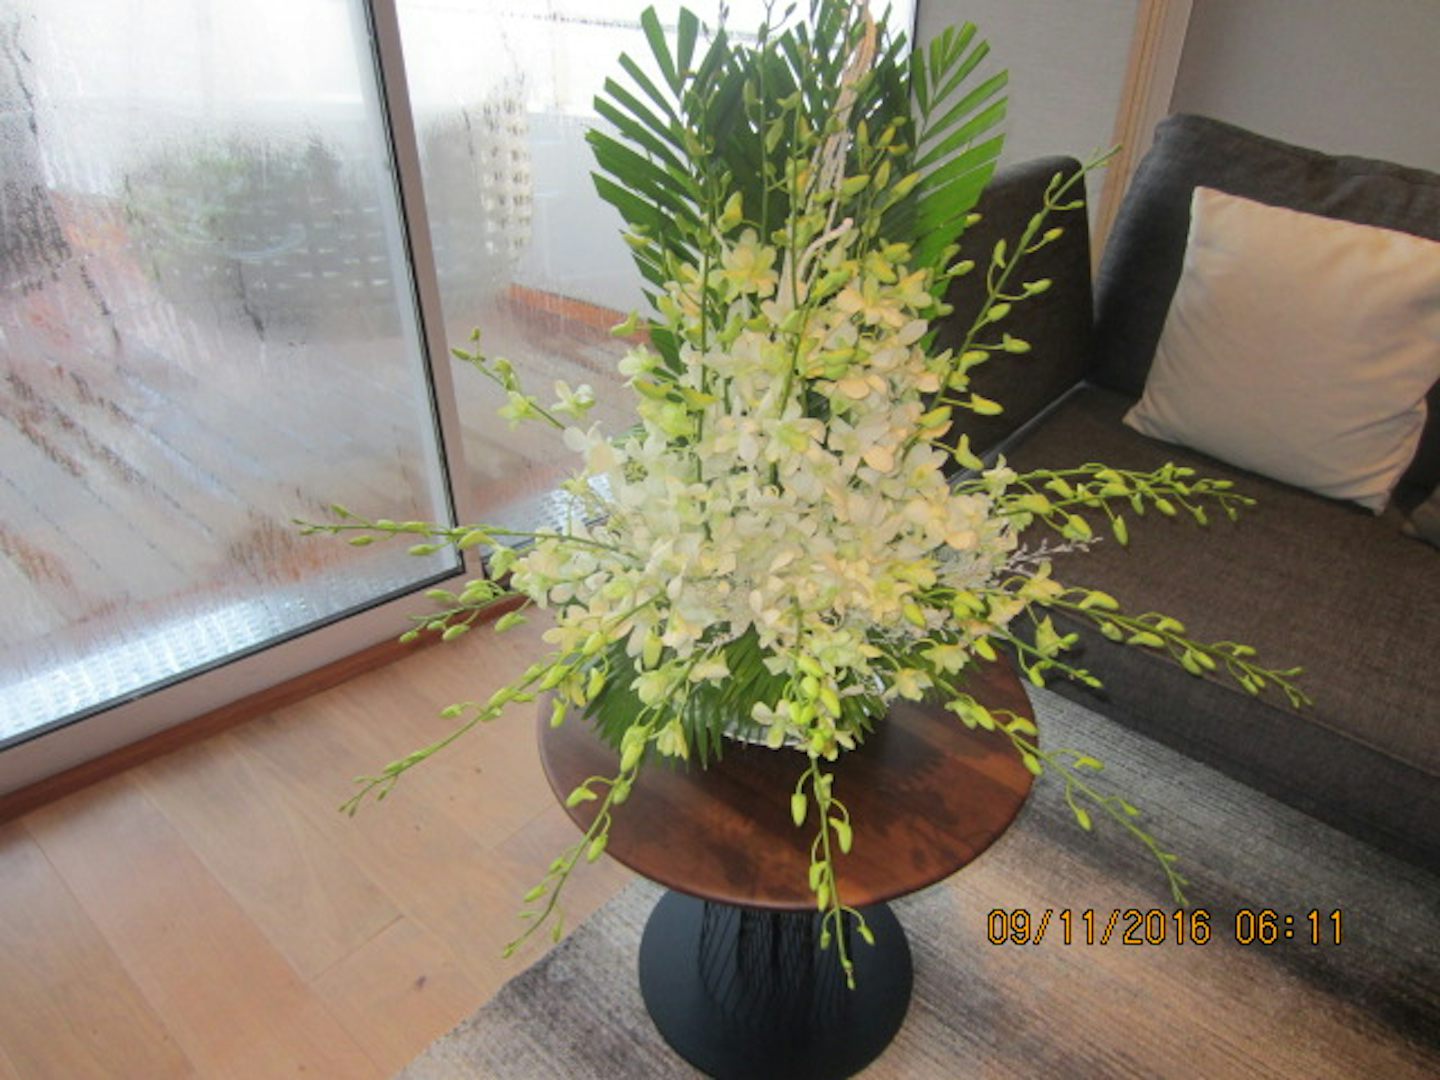 One of two beautiful arrangements of orchids in our cabin.